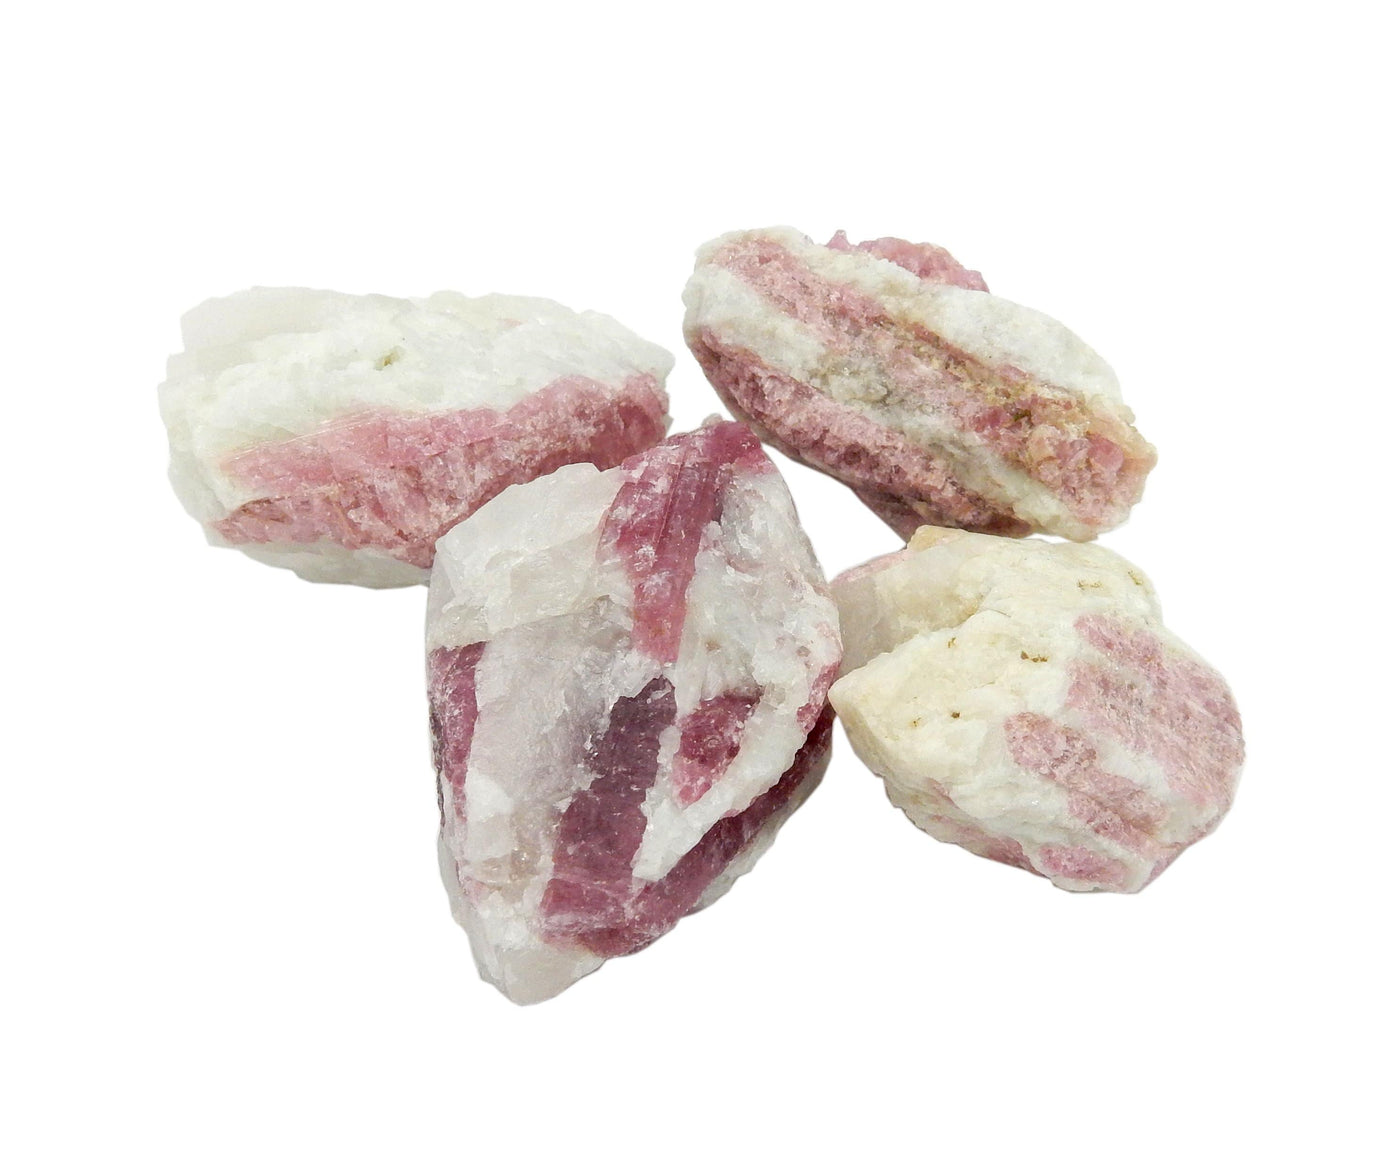 4 pink tourmaline stones showing varying color and shapes of stones